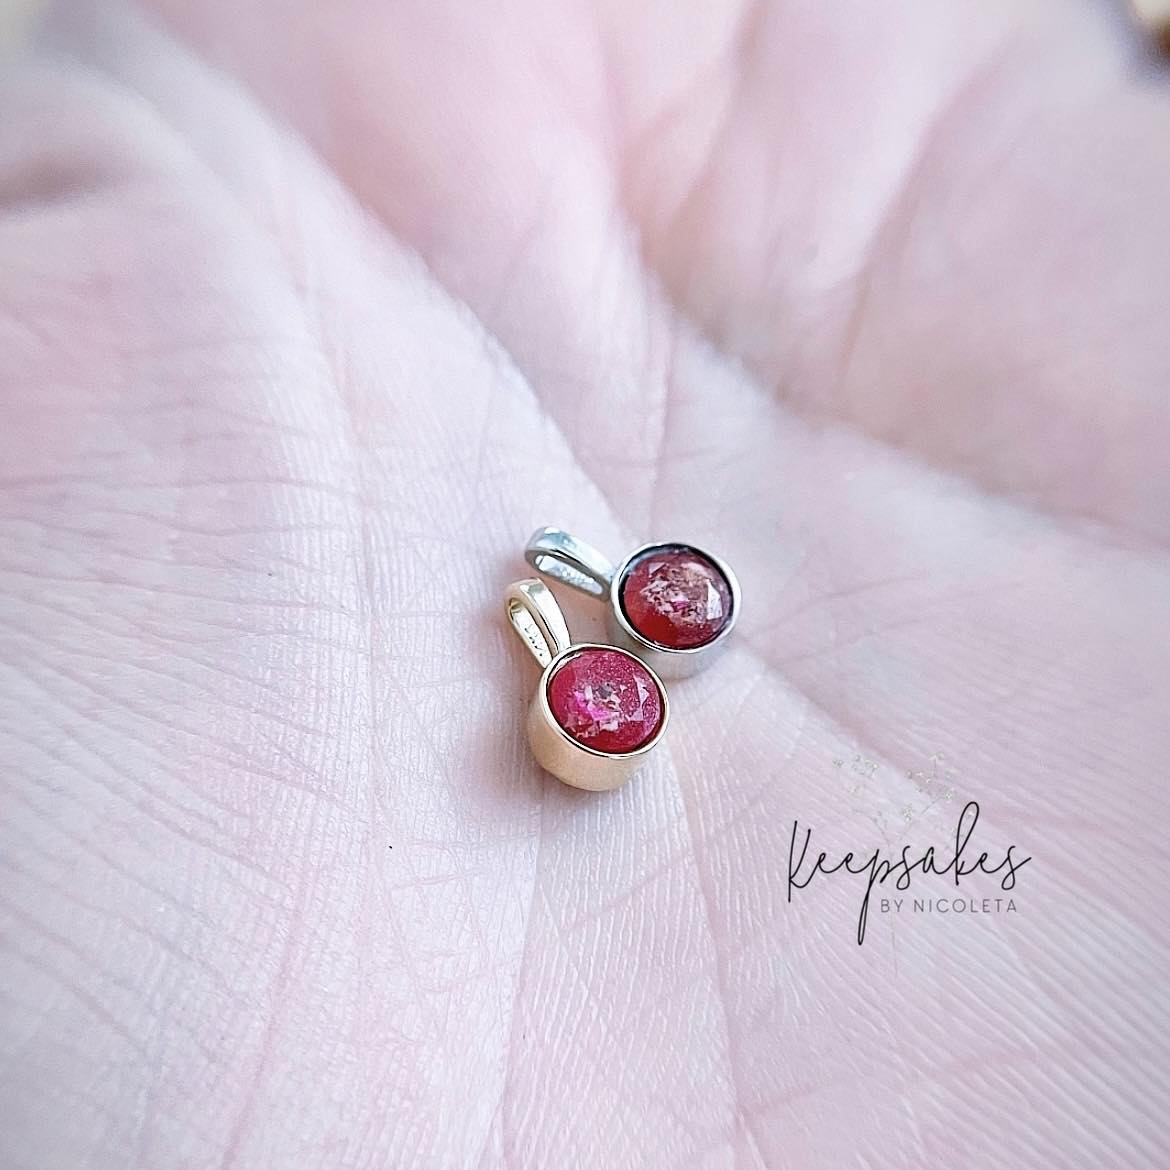 Dainty little charm made with ashes and True Red colour